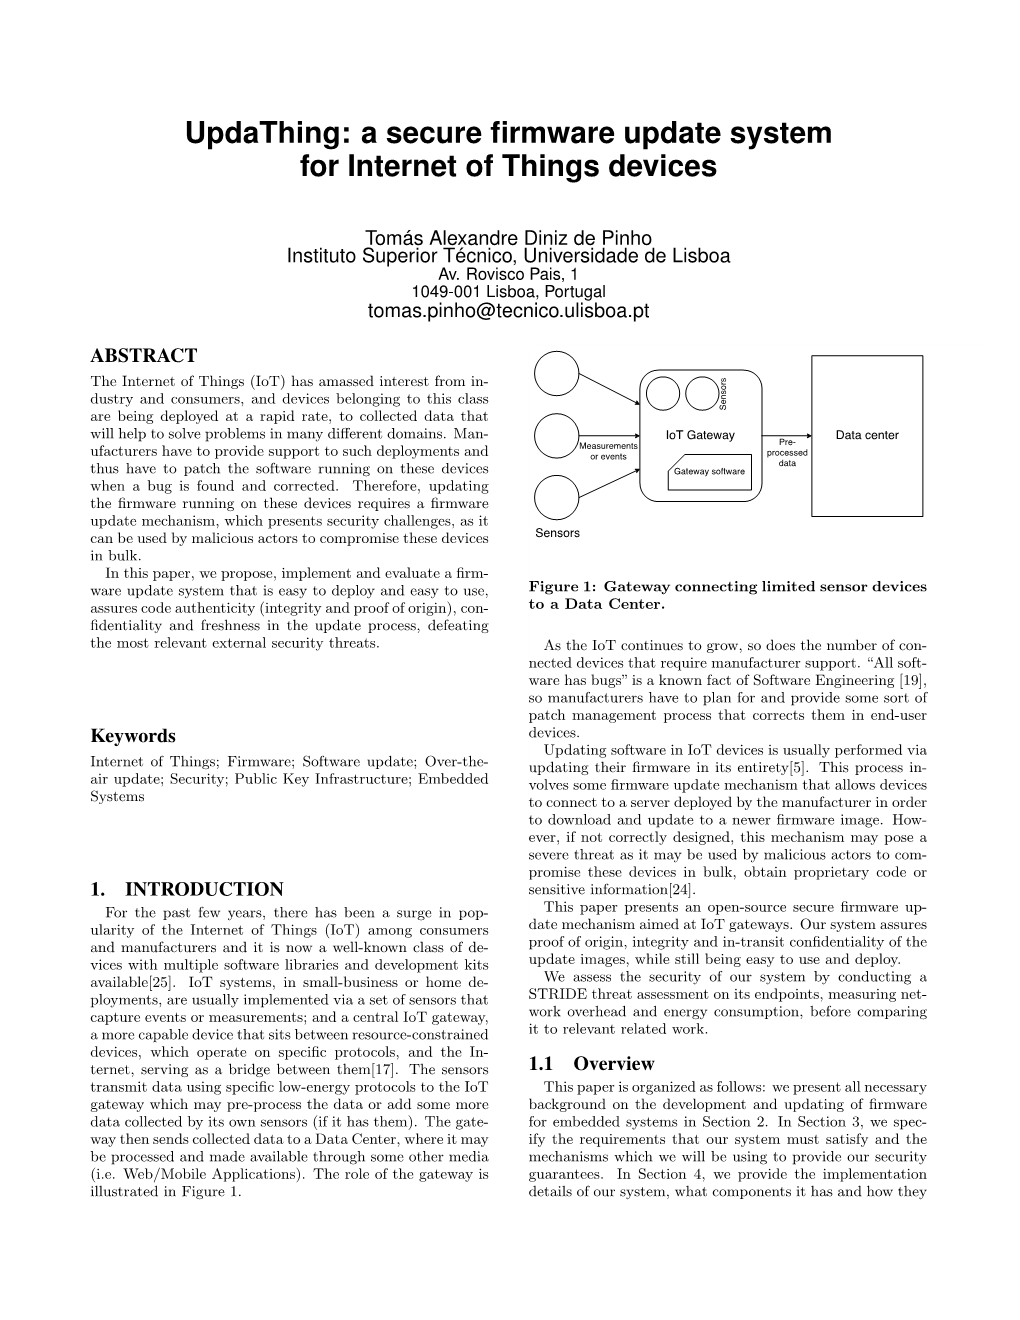 Updathing: a Secure Firmware Update System for Internet of Things Devices